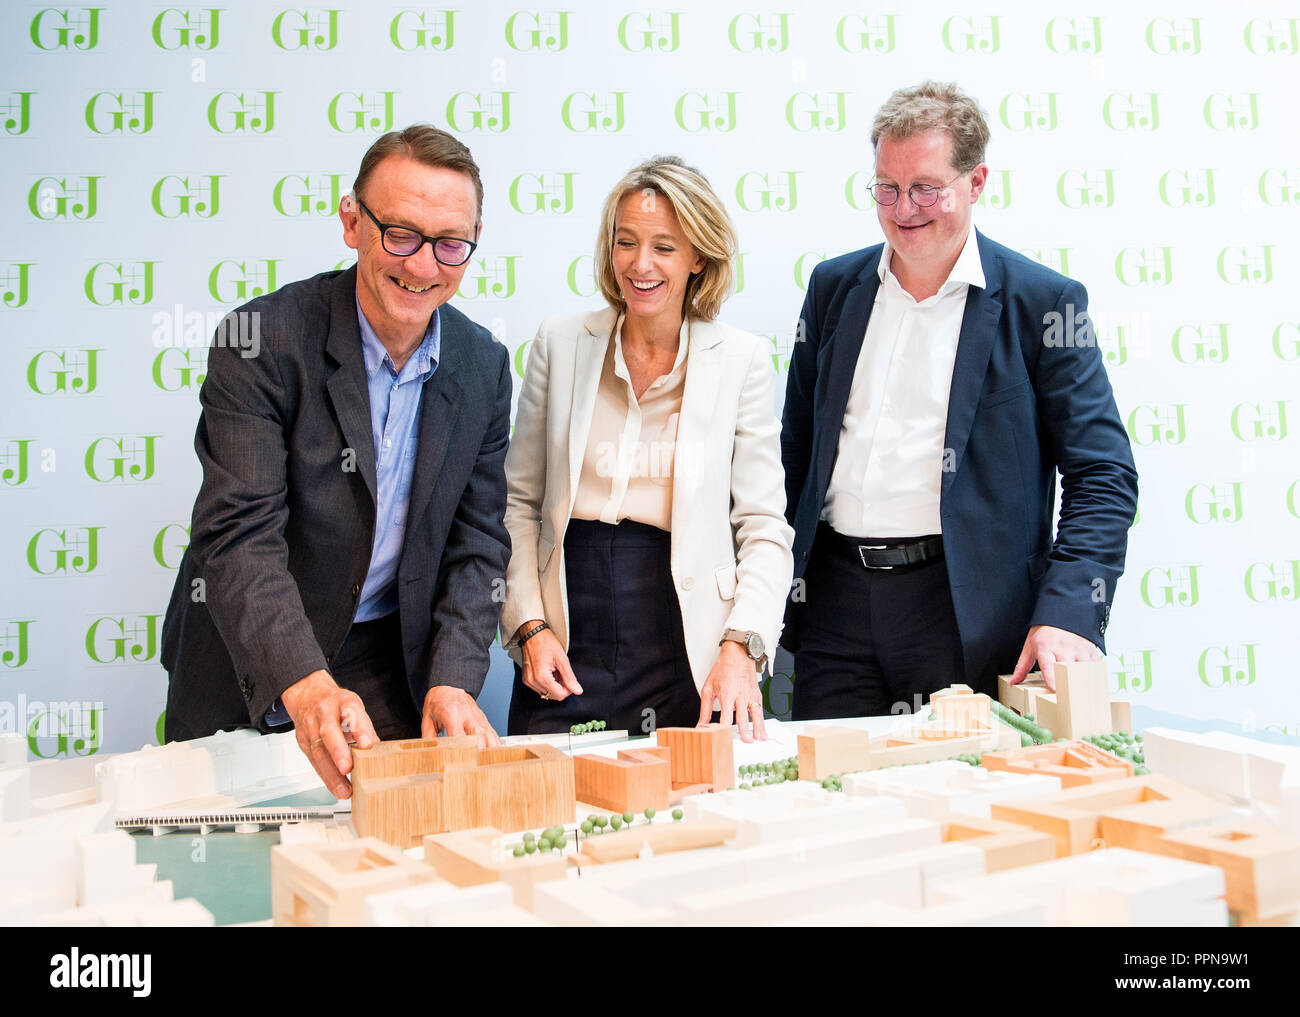 27 September 2018, Hamburg: Peter St. John, architect of Caruso St. John from London (l-r), Julia Jäkel, CEO of Gruner + Jahr and Franz-Josef Höing, Chief Building Director of the Urban Development and Housing Authority, look at a wooden model of the winning design for the new Gruner + Jahr publishing building. The publishing house gets a new company headquarters in HafenCity. Photo: Daniel Bockwoldt/dpa Stock Photo